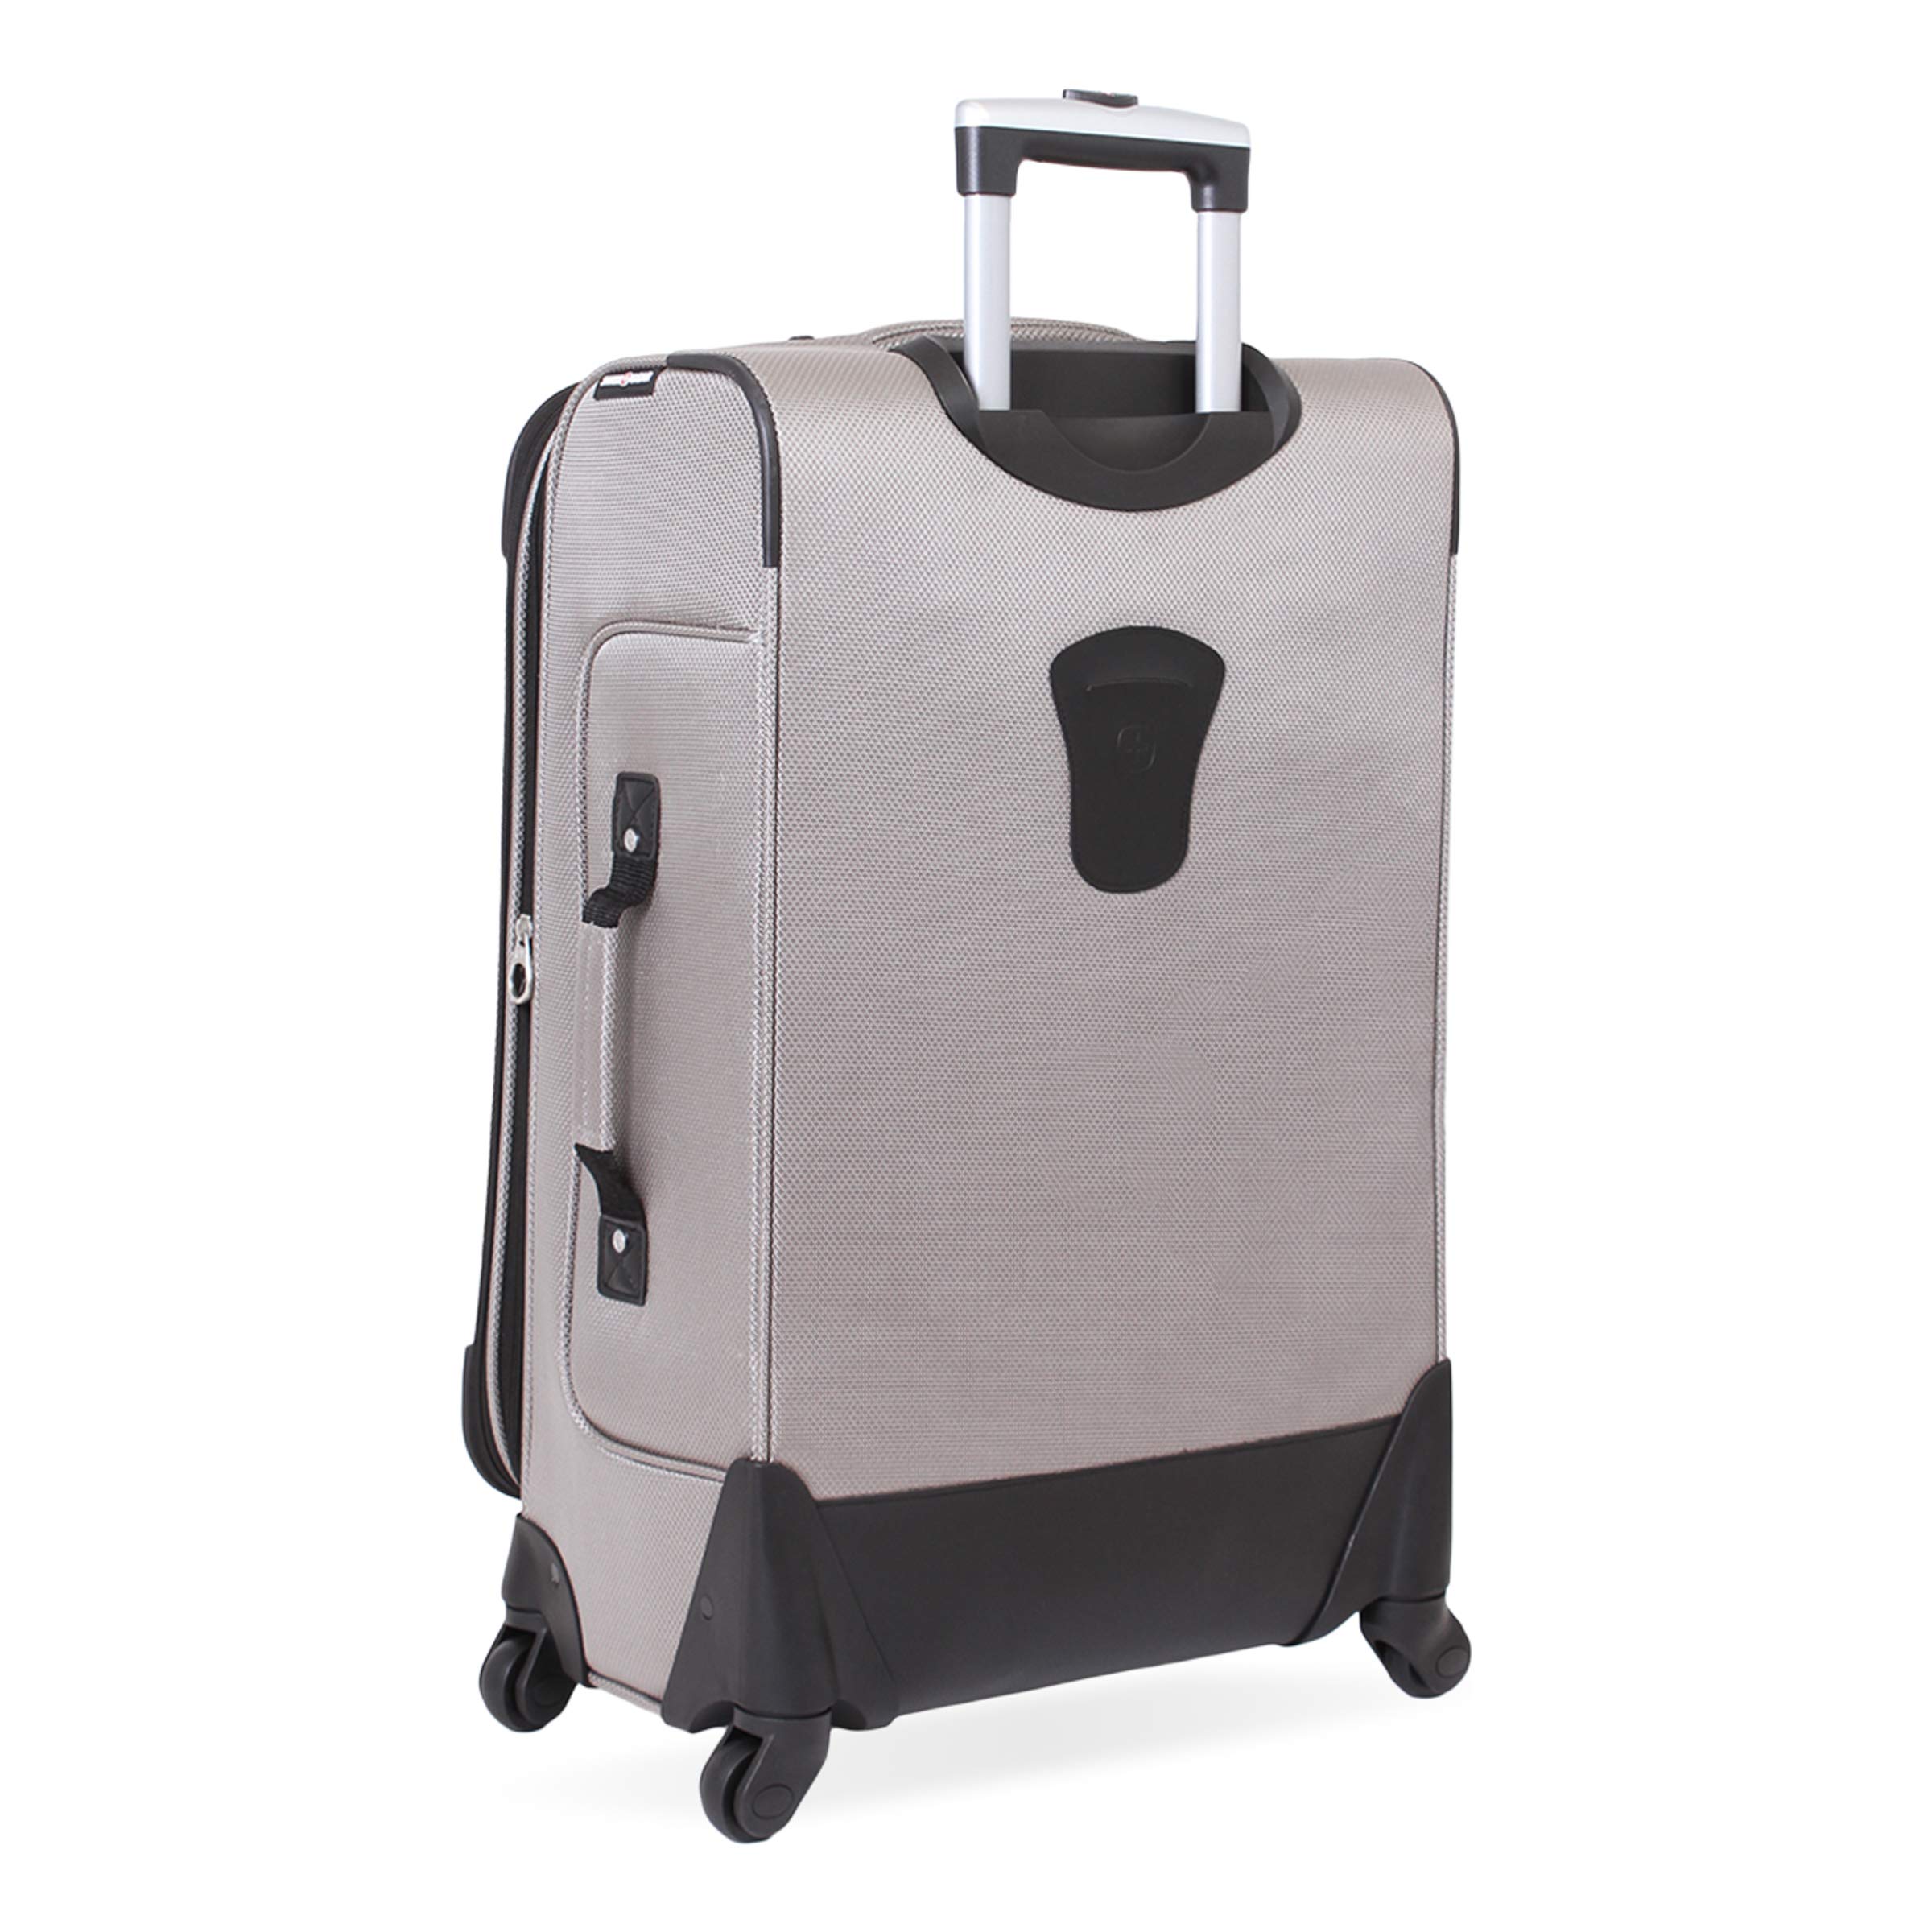 SwissGear Sion Softside Expandable Roller Luggage, Pewter, Checked-Medium 25-Inch